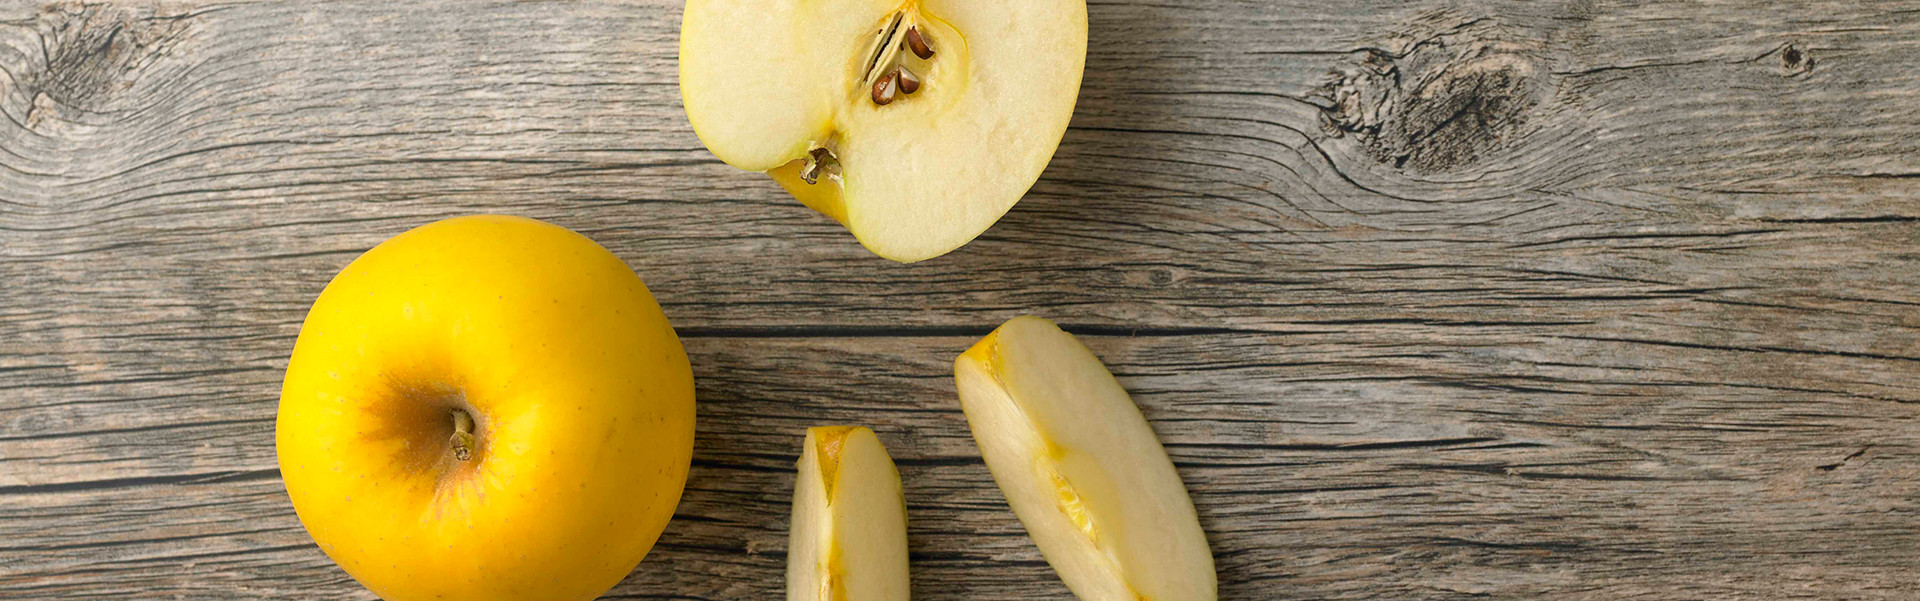 Healthy Snack Ideas With Opal® Apples